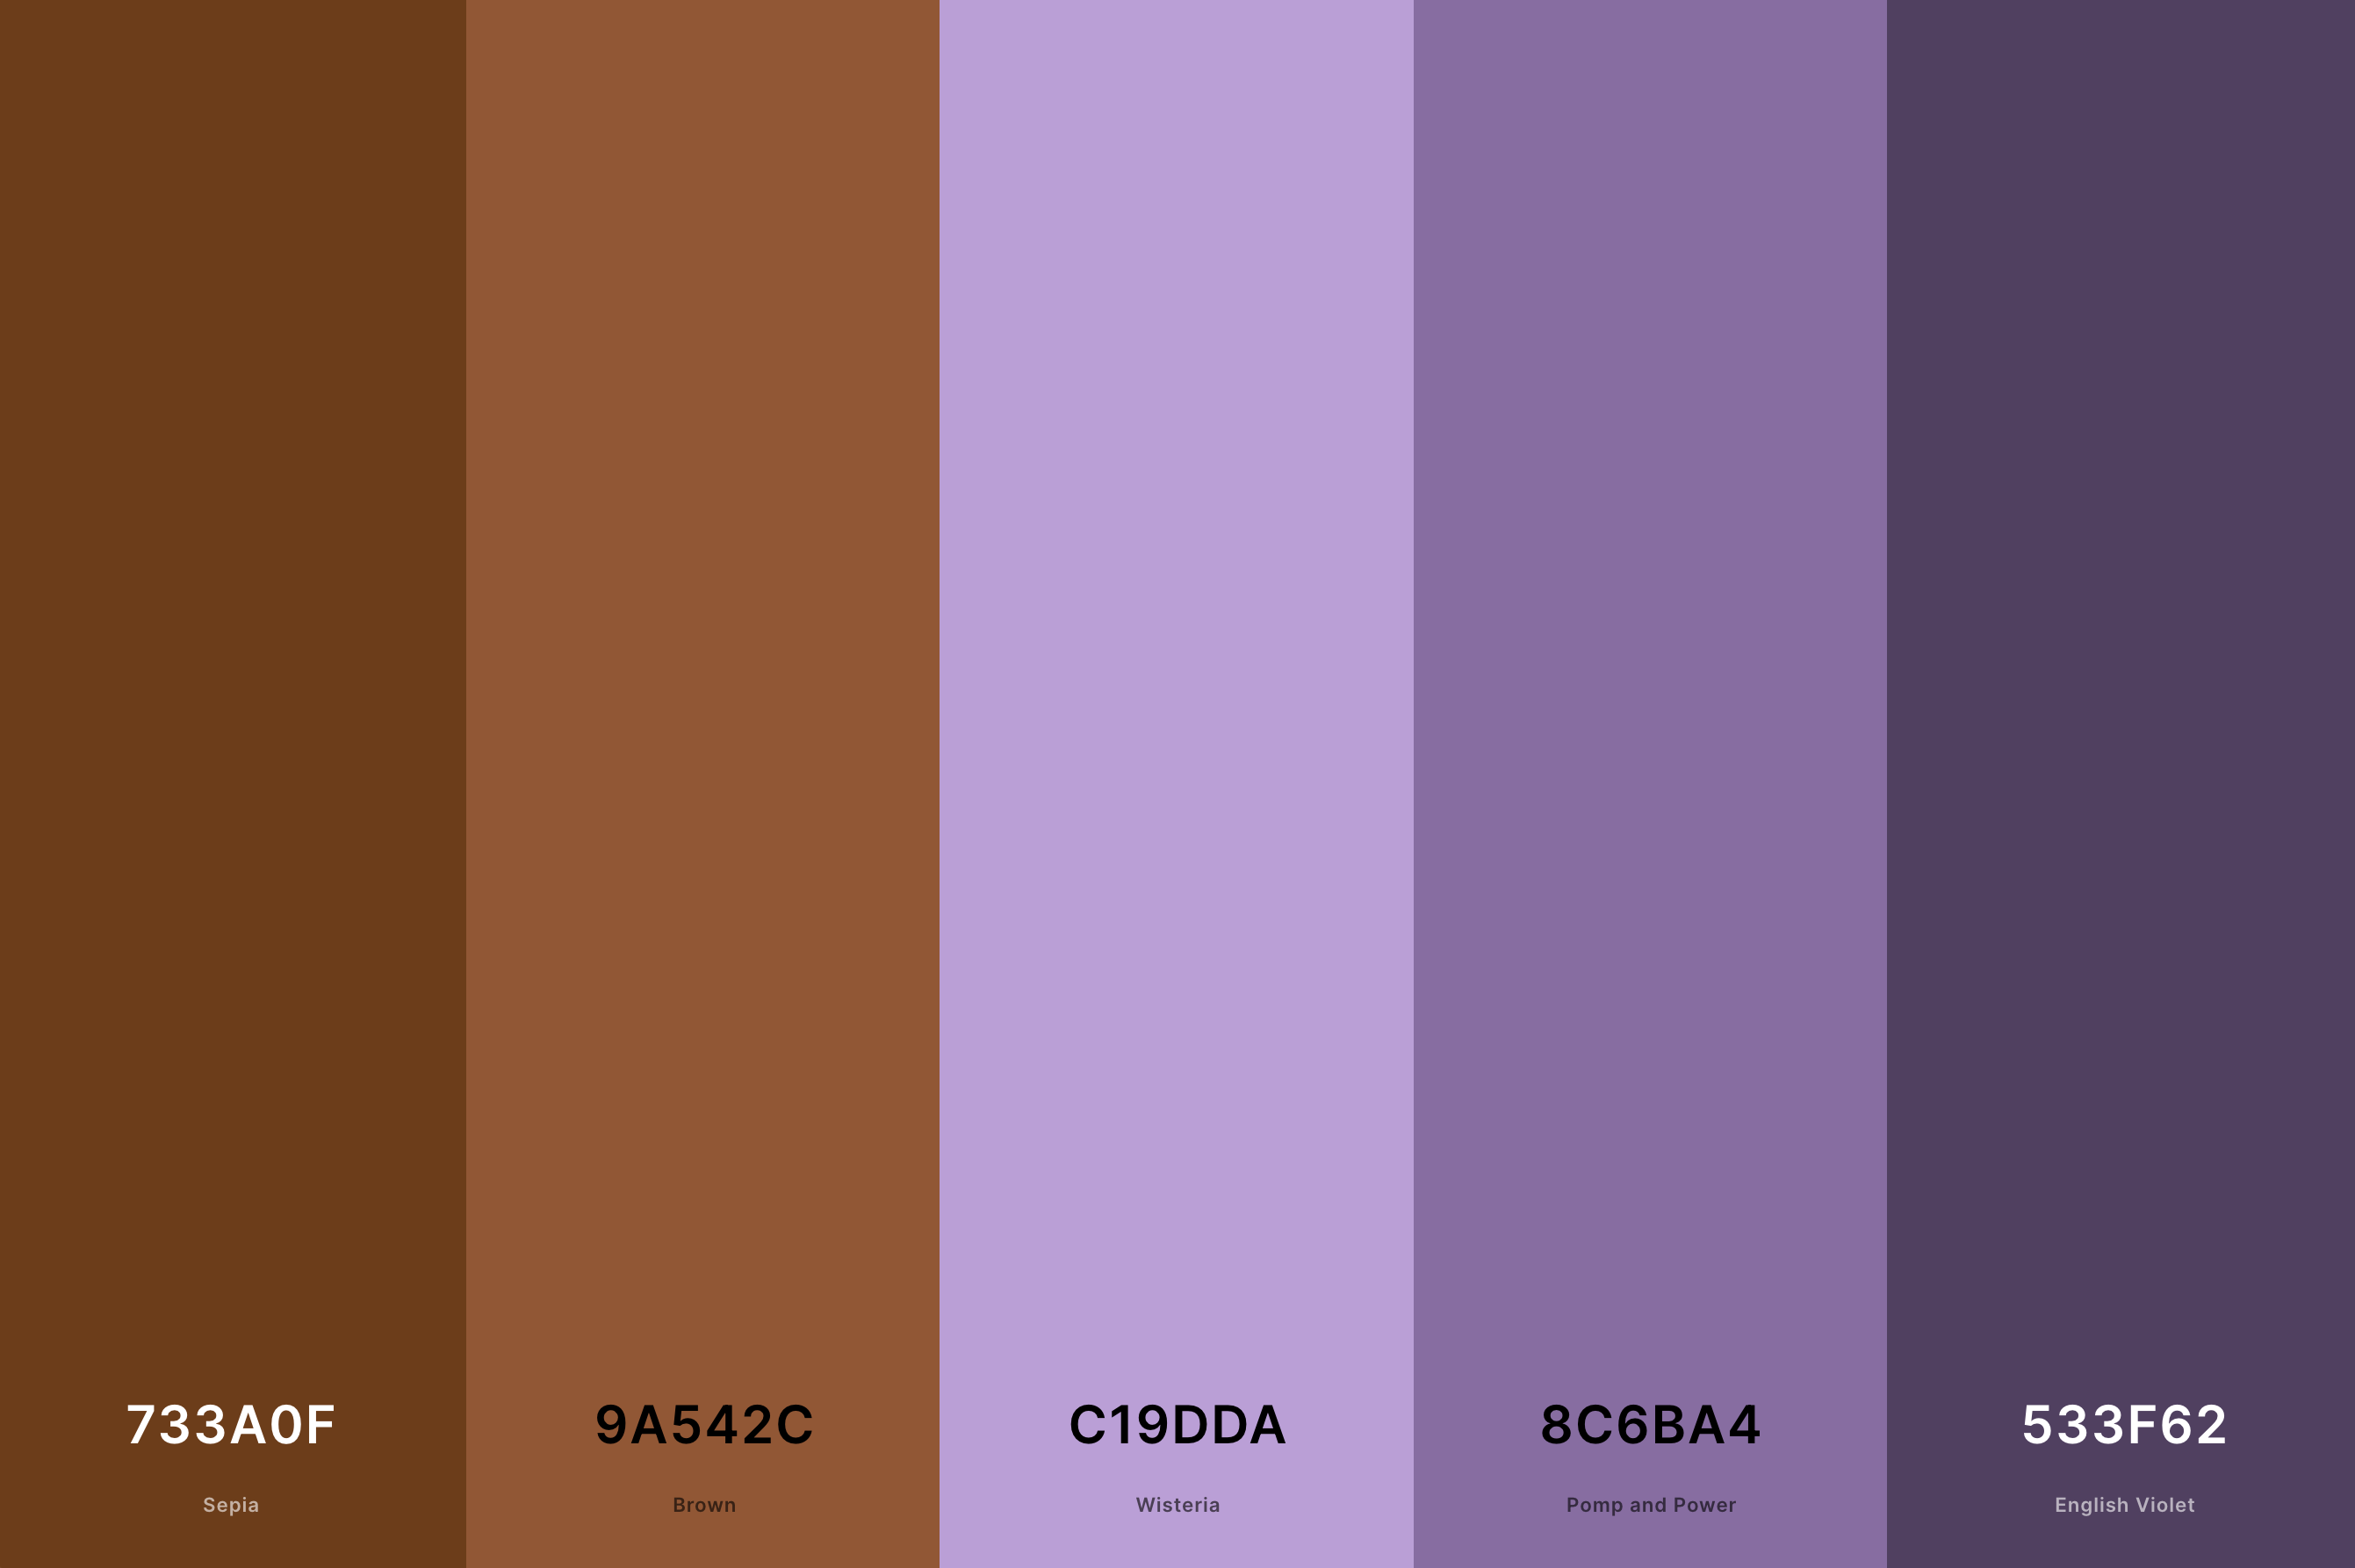 19. Mauve And Brown Color Palette Color Palette with Sepia (Hex #733A0F) + Brown (Hex #9A542C) + Wisteria (Hex #C19DDA) + Pomp And Power (Hex #8C6BA4) + English Violet (Hex #533F62) Color Palette with Hex Codes